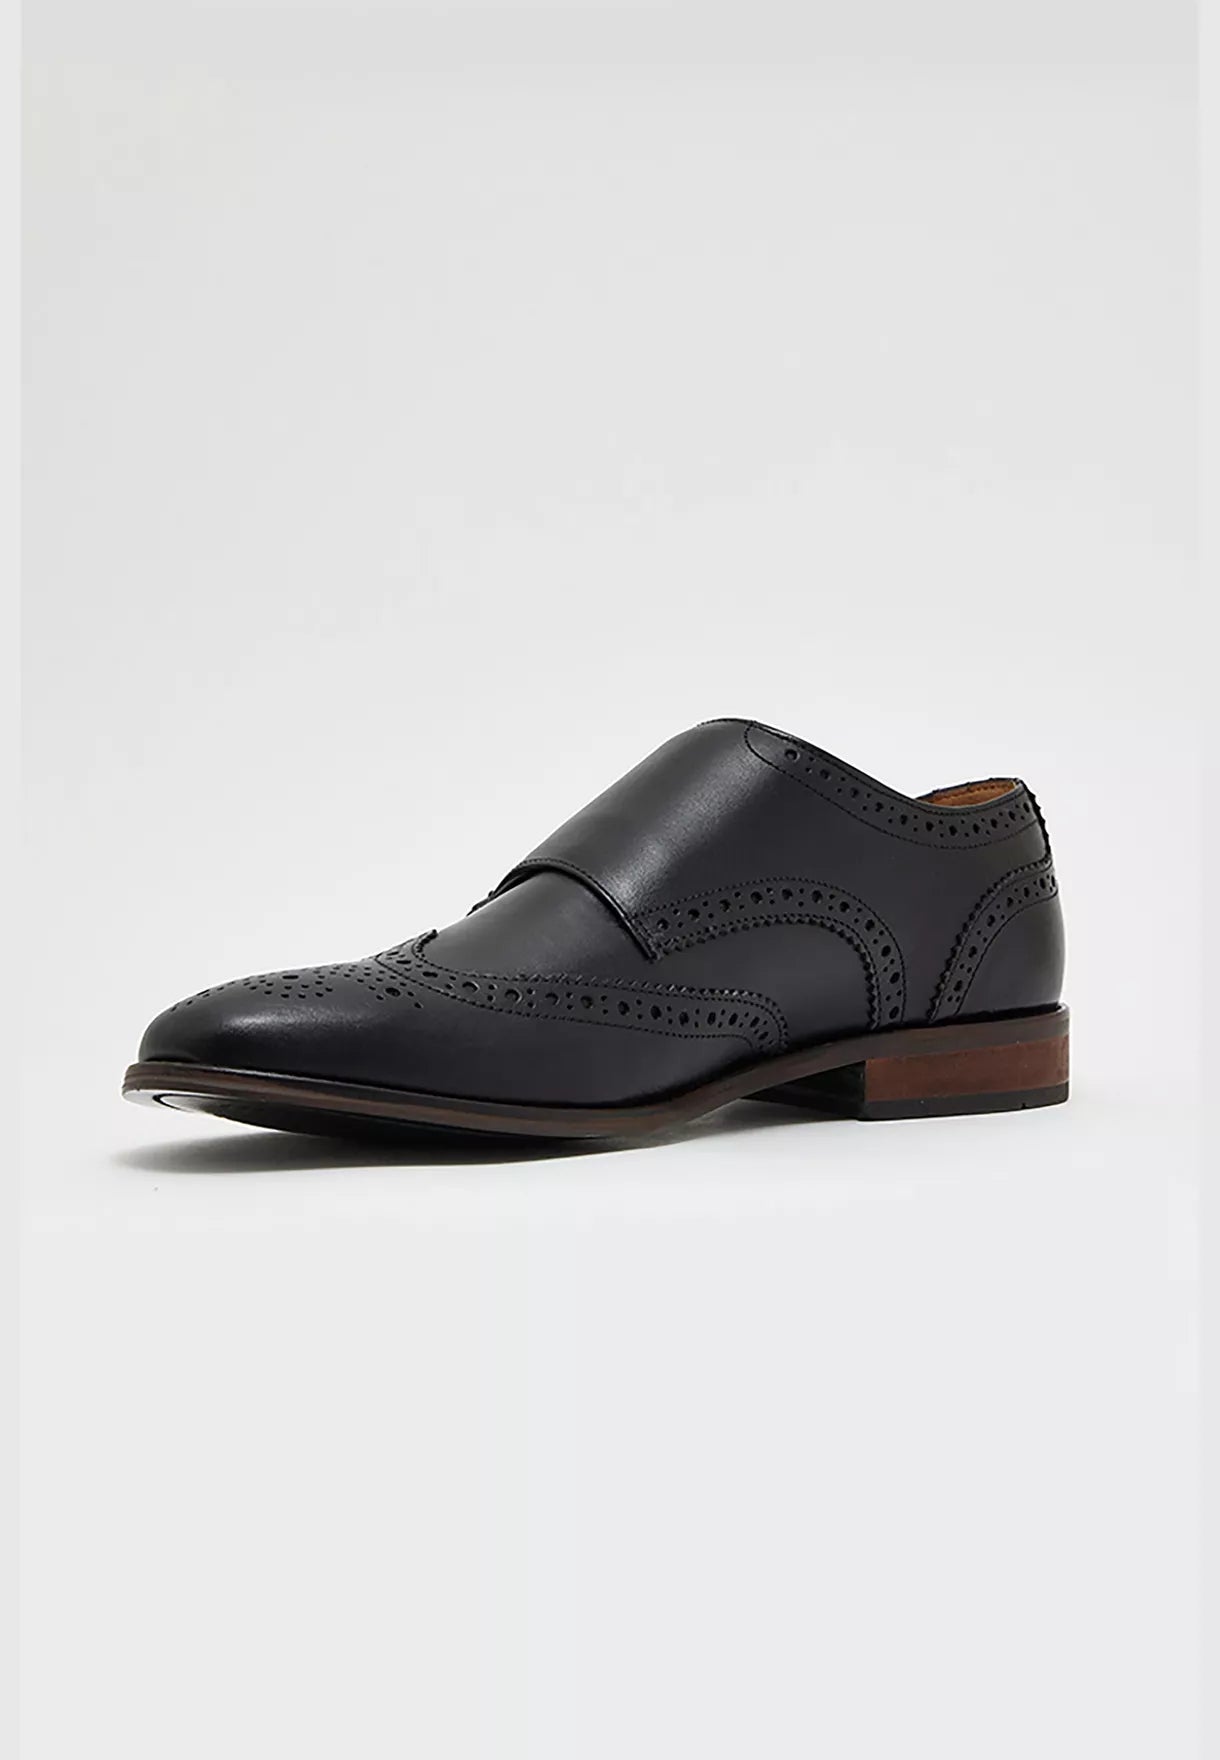 Leather Formal Shoes With Buckle Closure